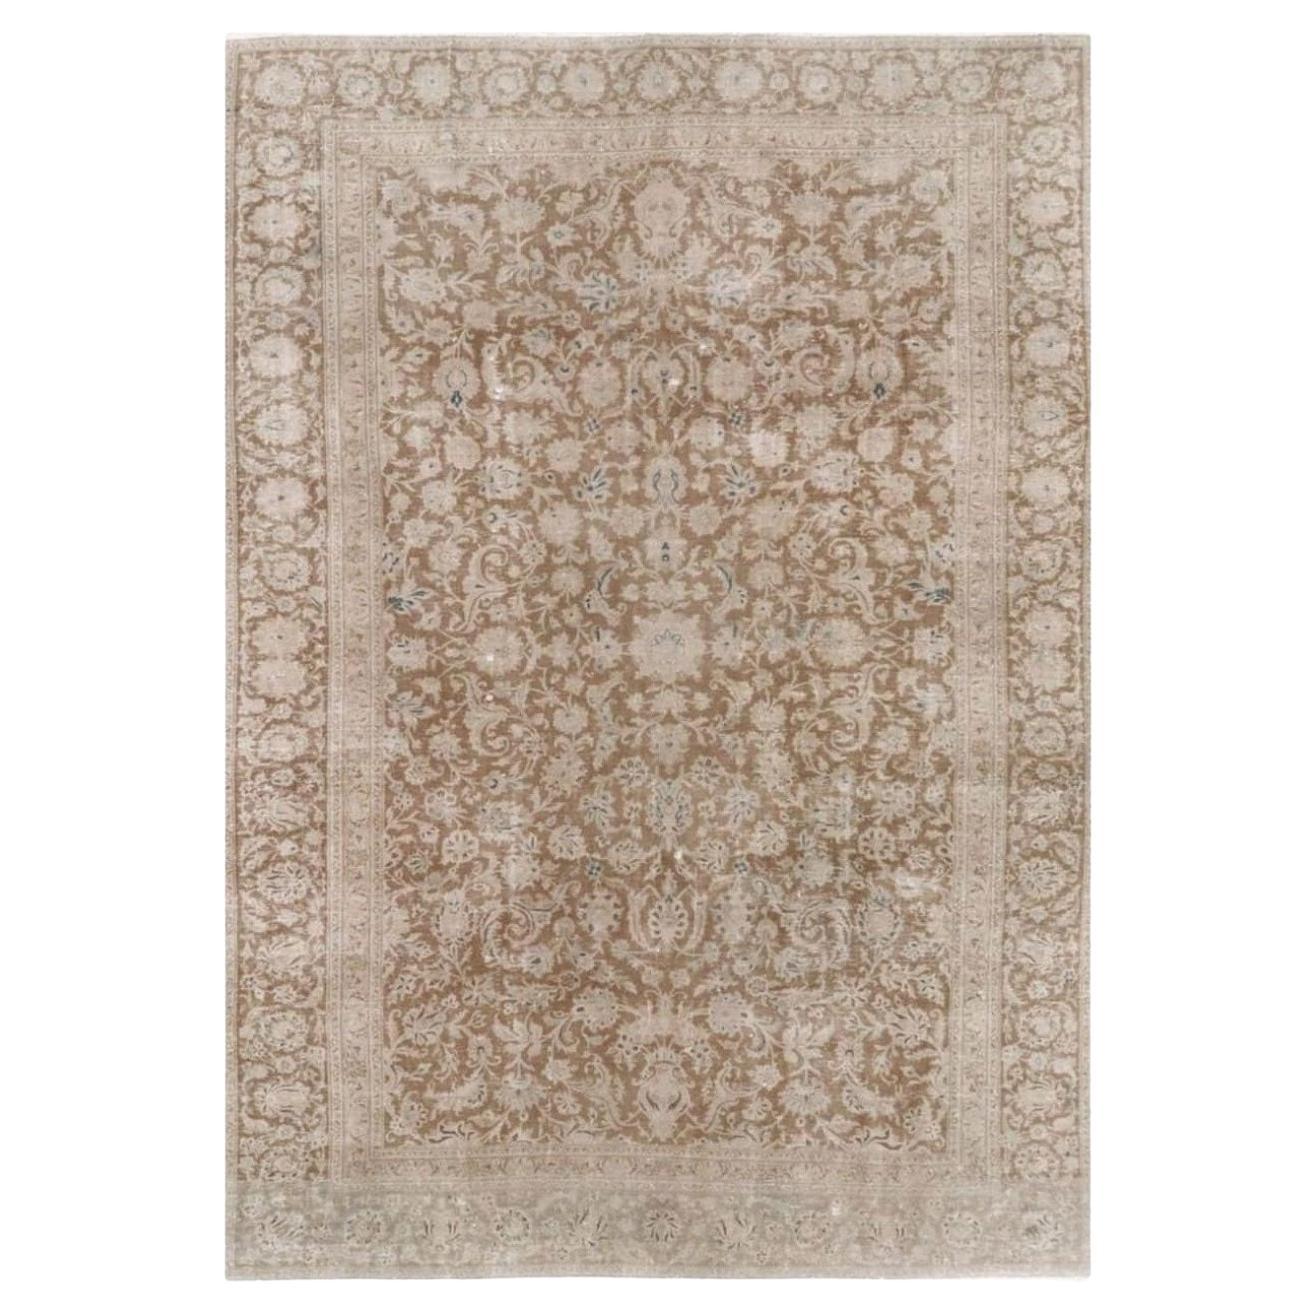 Tabriz Rug Classic Vintage Rug Muted Gray Beige Brown Hand Knotted Neutral For Sale